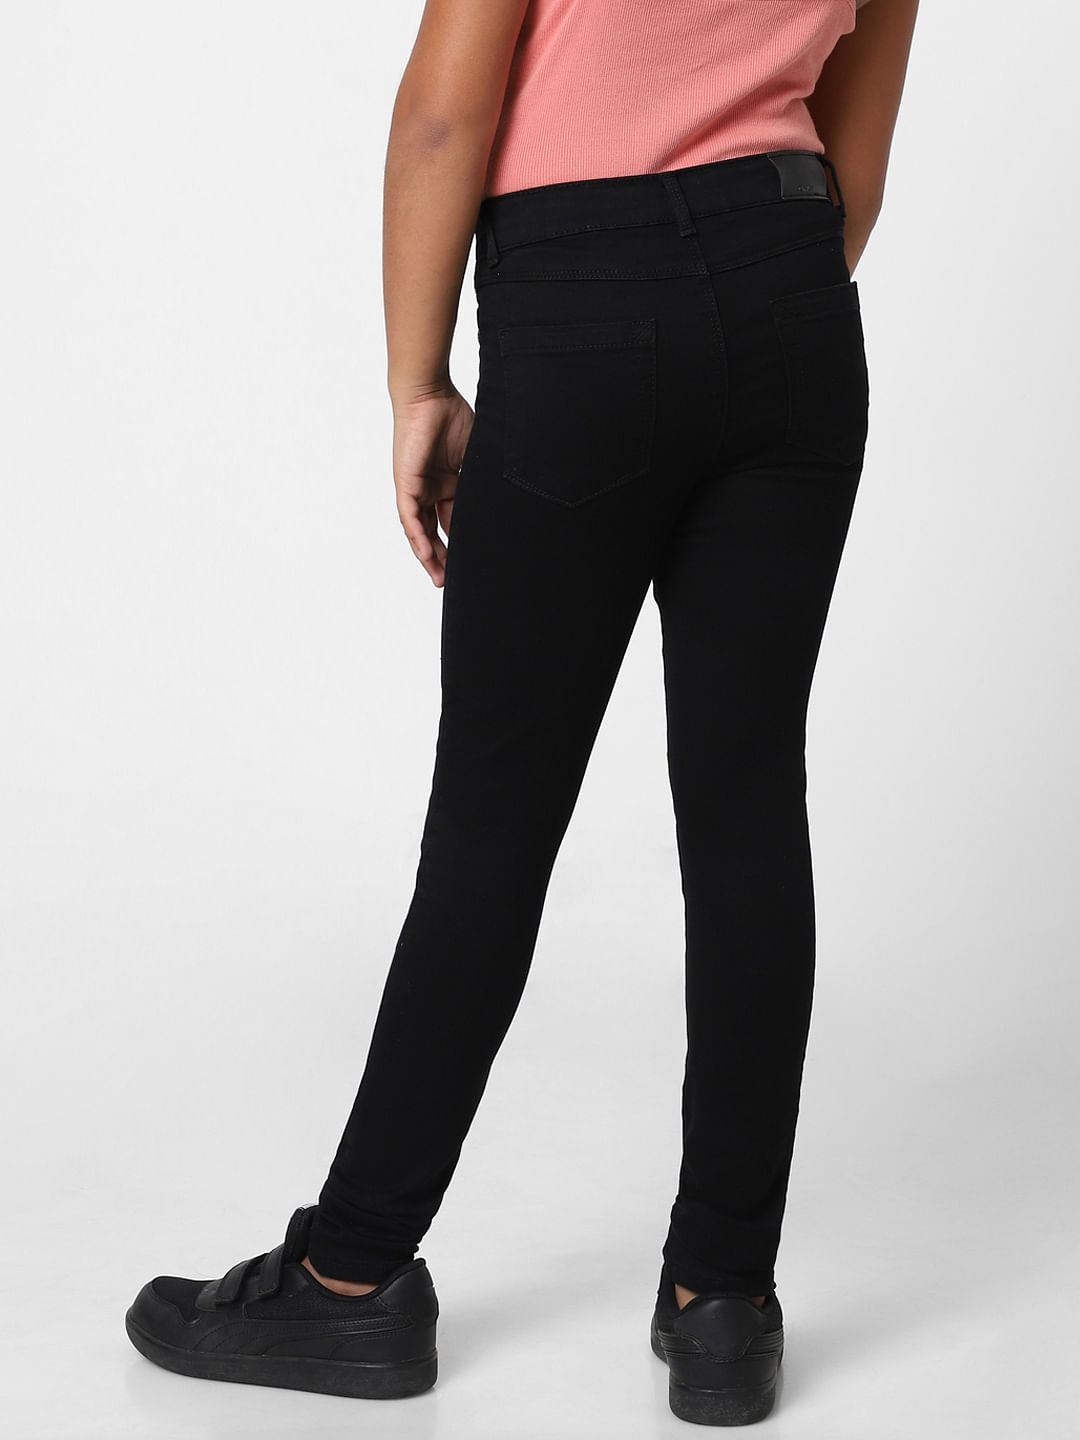 girls Fancy track pant (Black) in Delhi at best price by Wholetale -  Justdial